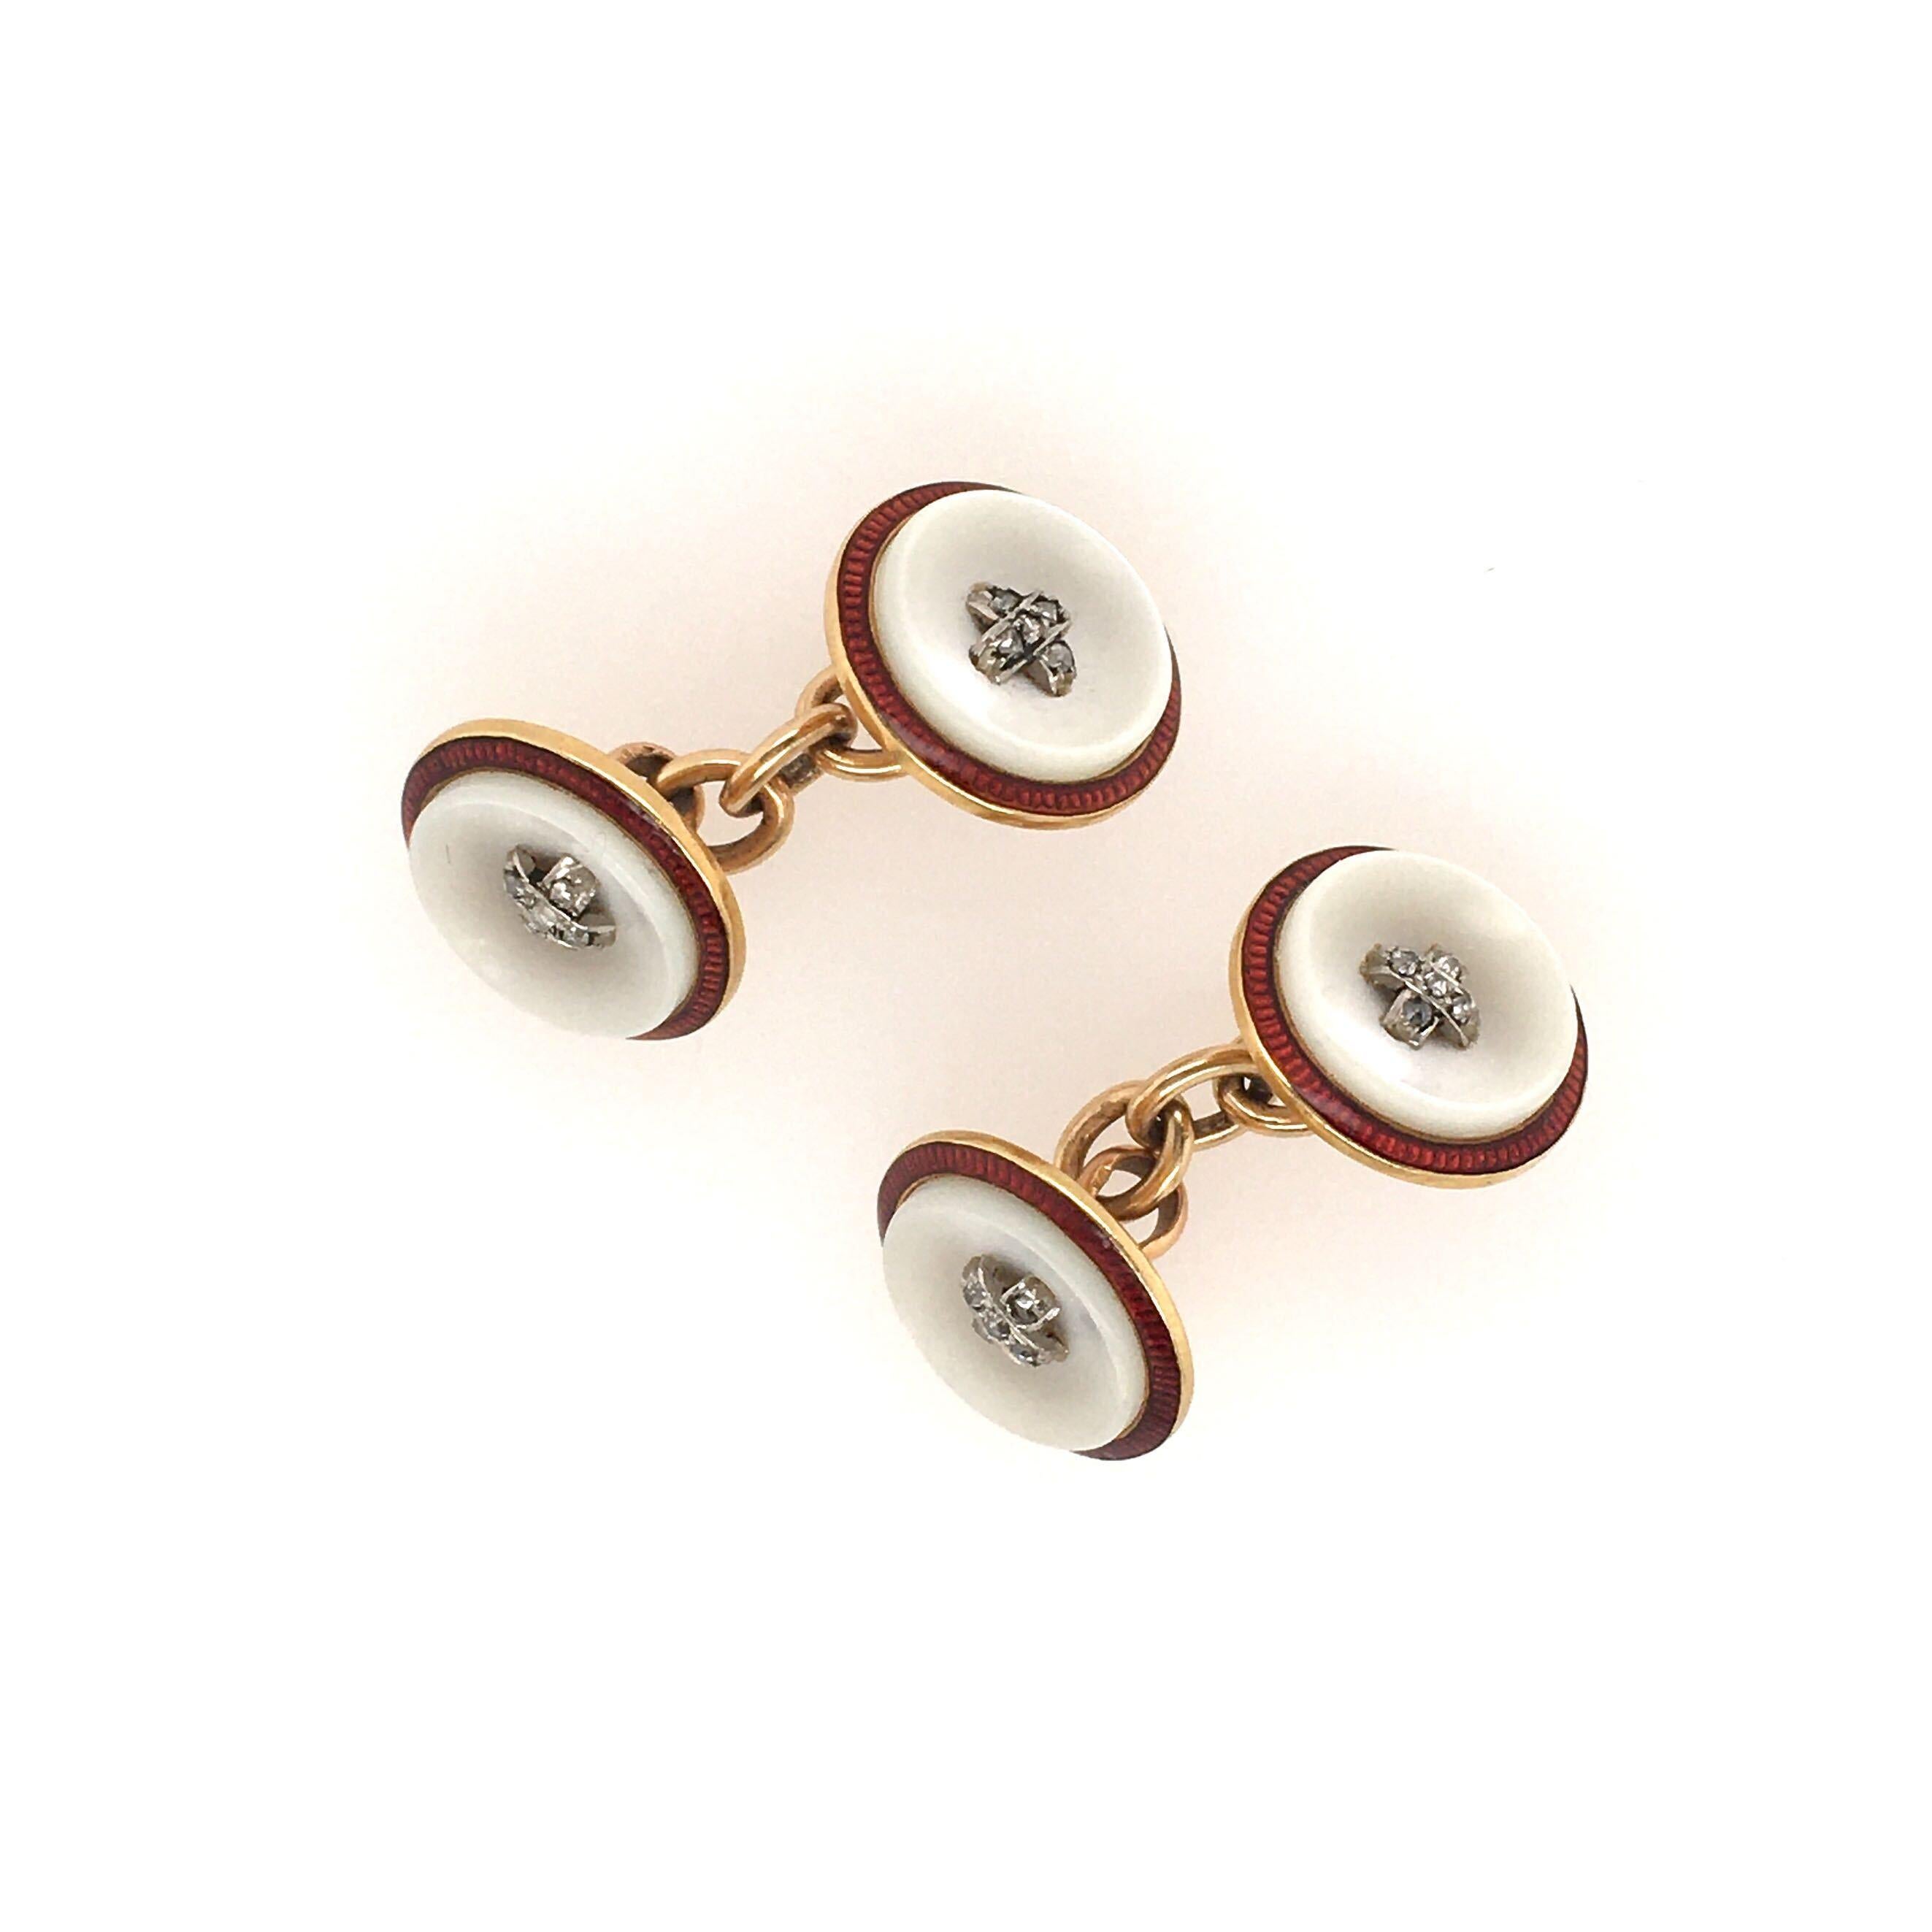 A pair of 18 karat yellow gold, mother of pearl, diamond and enamel cufflinks. Each double link designed as a mother of pearl button, enhanced by pave set diamonds, with red enamel trim, joined by a chain. Diameter is approximately 1/2 inch, gross